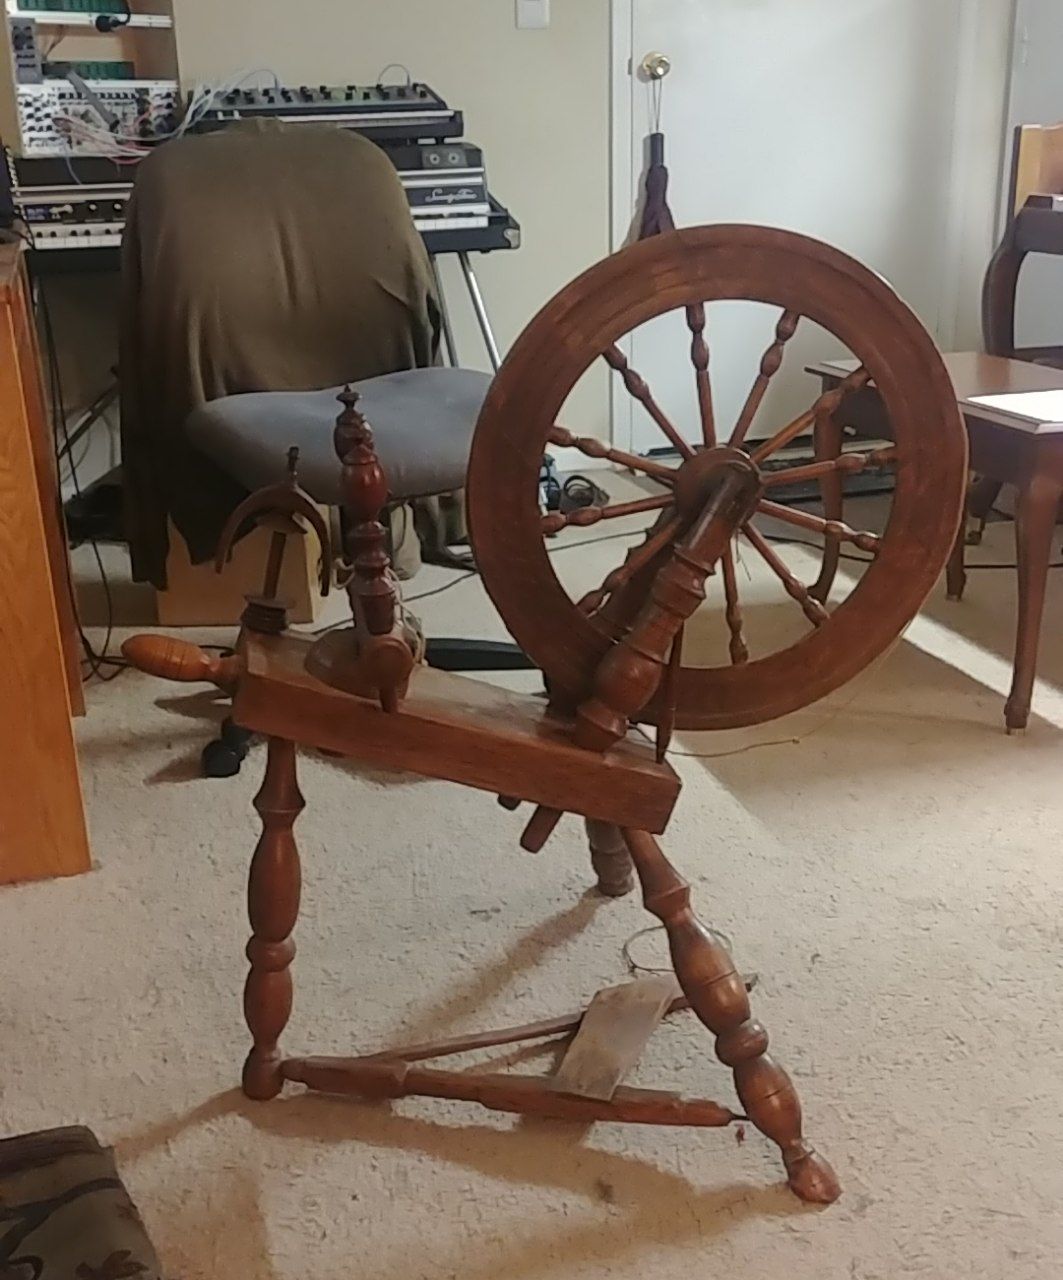 My spinning wheel, the day I got it home.  A bearing is missing, so the flyer is not properly mounted